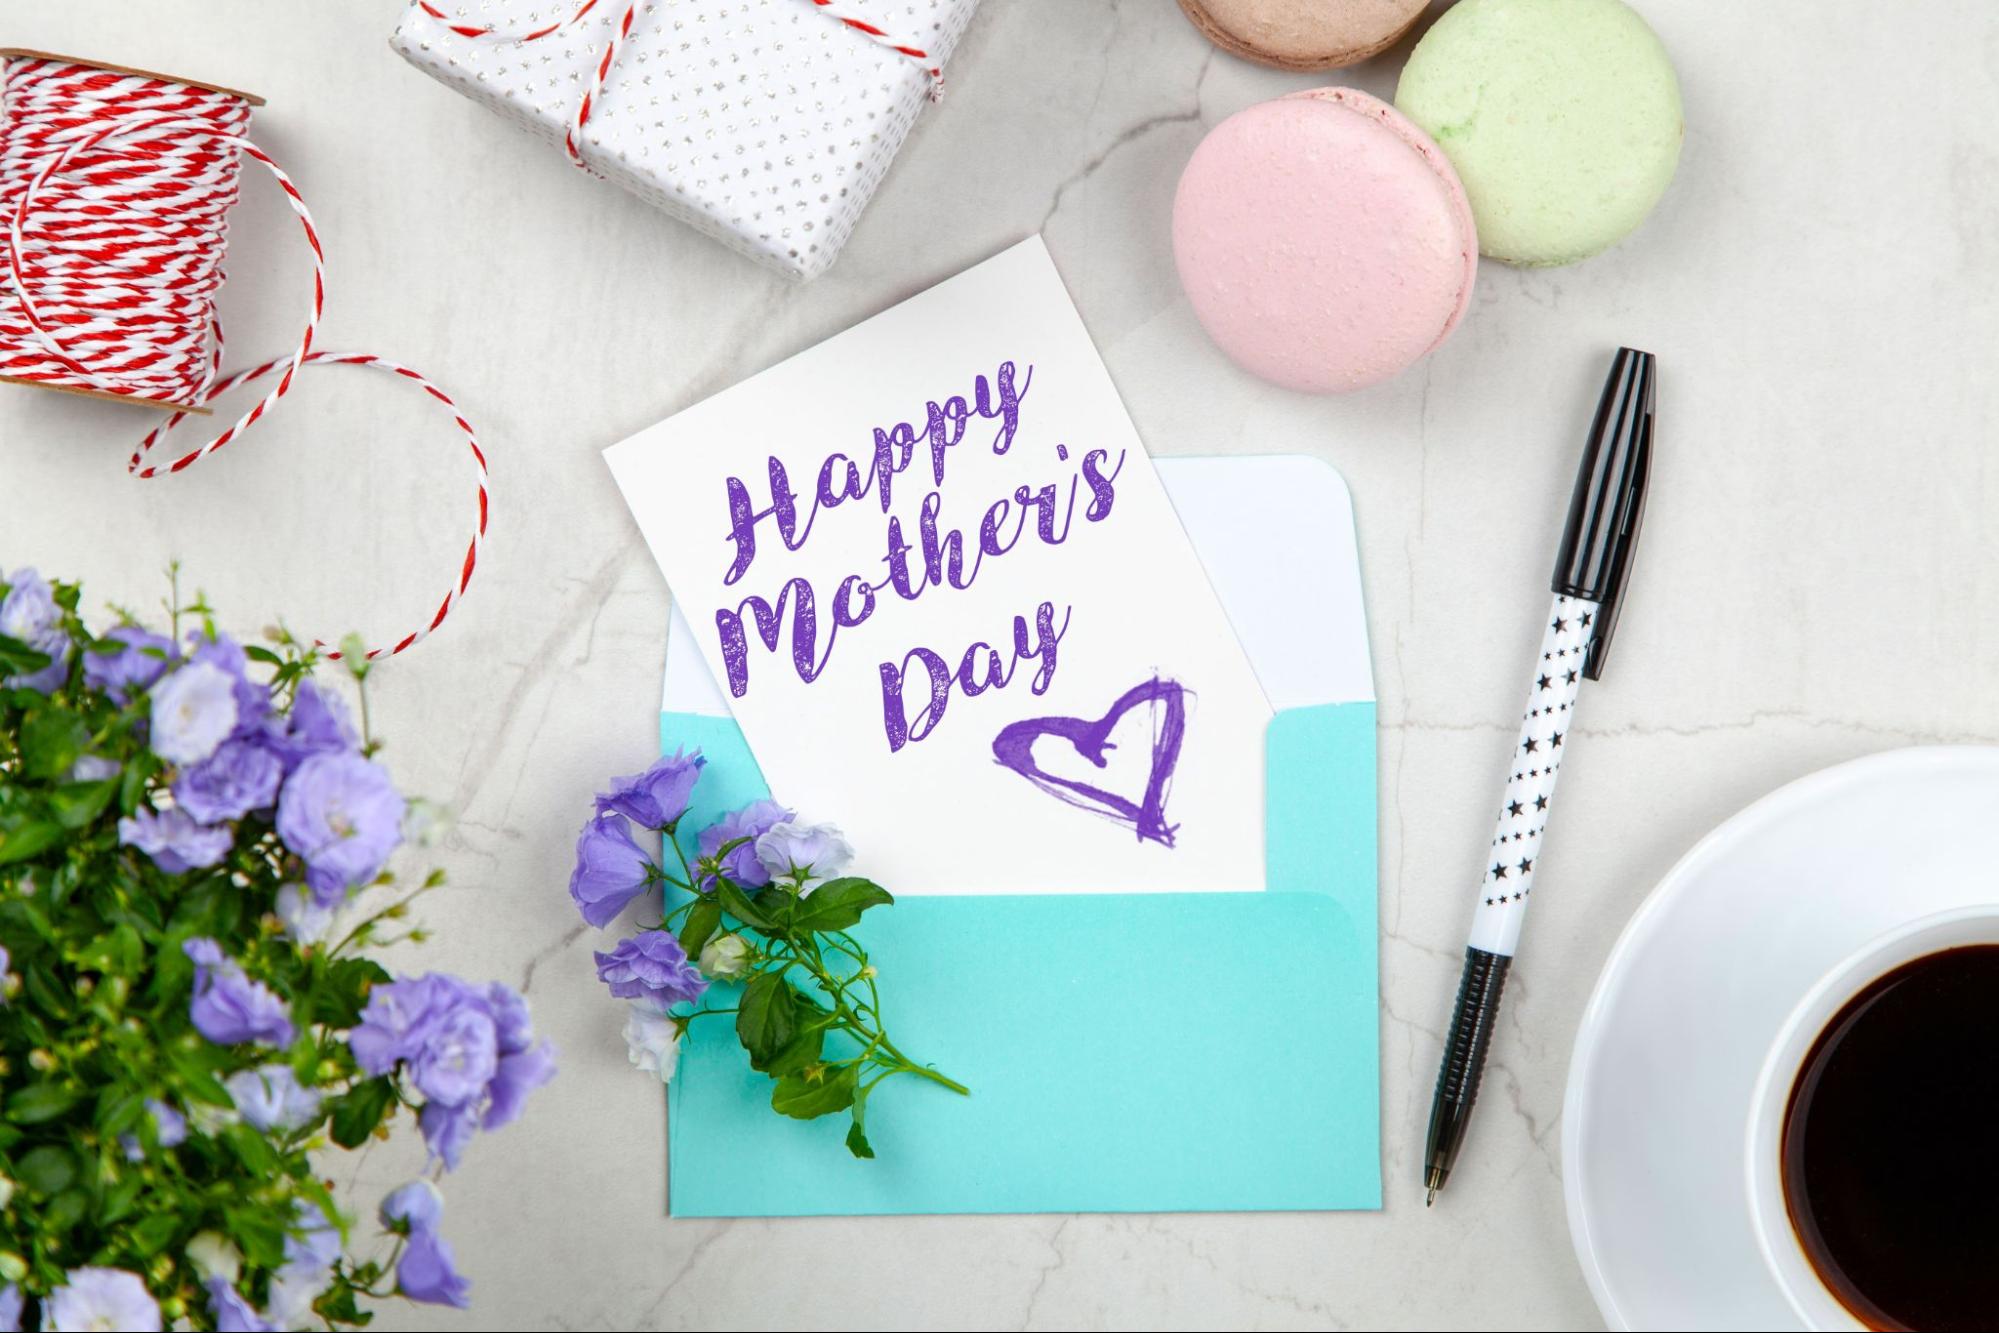 A Mother’s Day card sits among a pen, flowers, macaroons, and a wrapped gift.